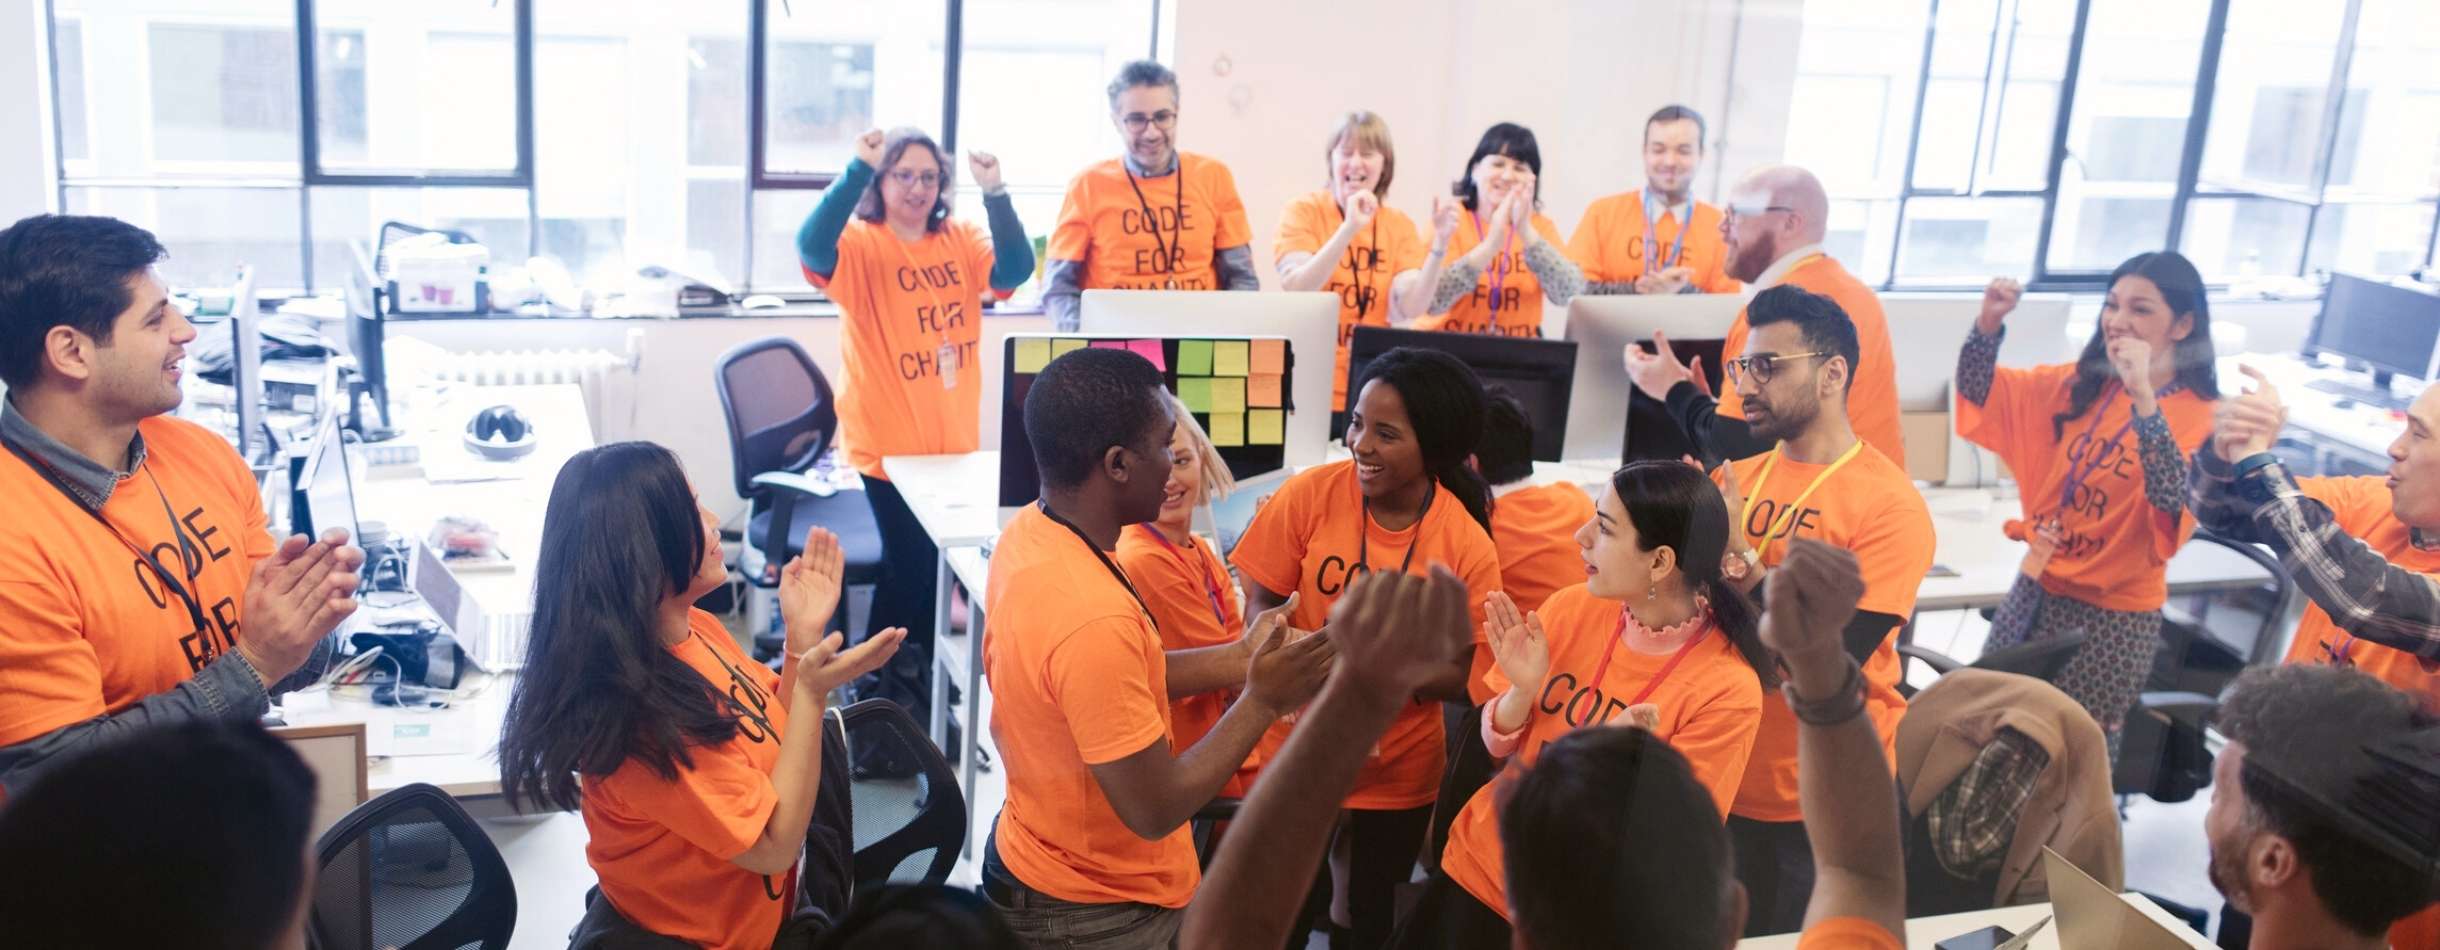 A large group of volunteers and nonprofit professionals celebrate after a successful fundraising round in their office. Everyone has matching orange shirts on.